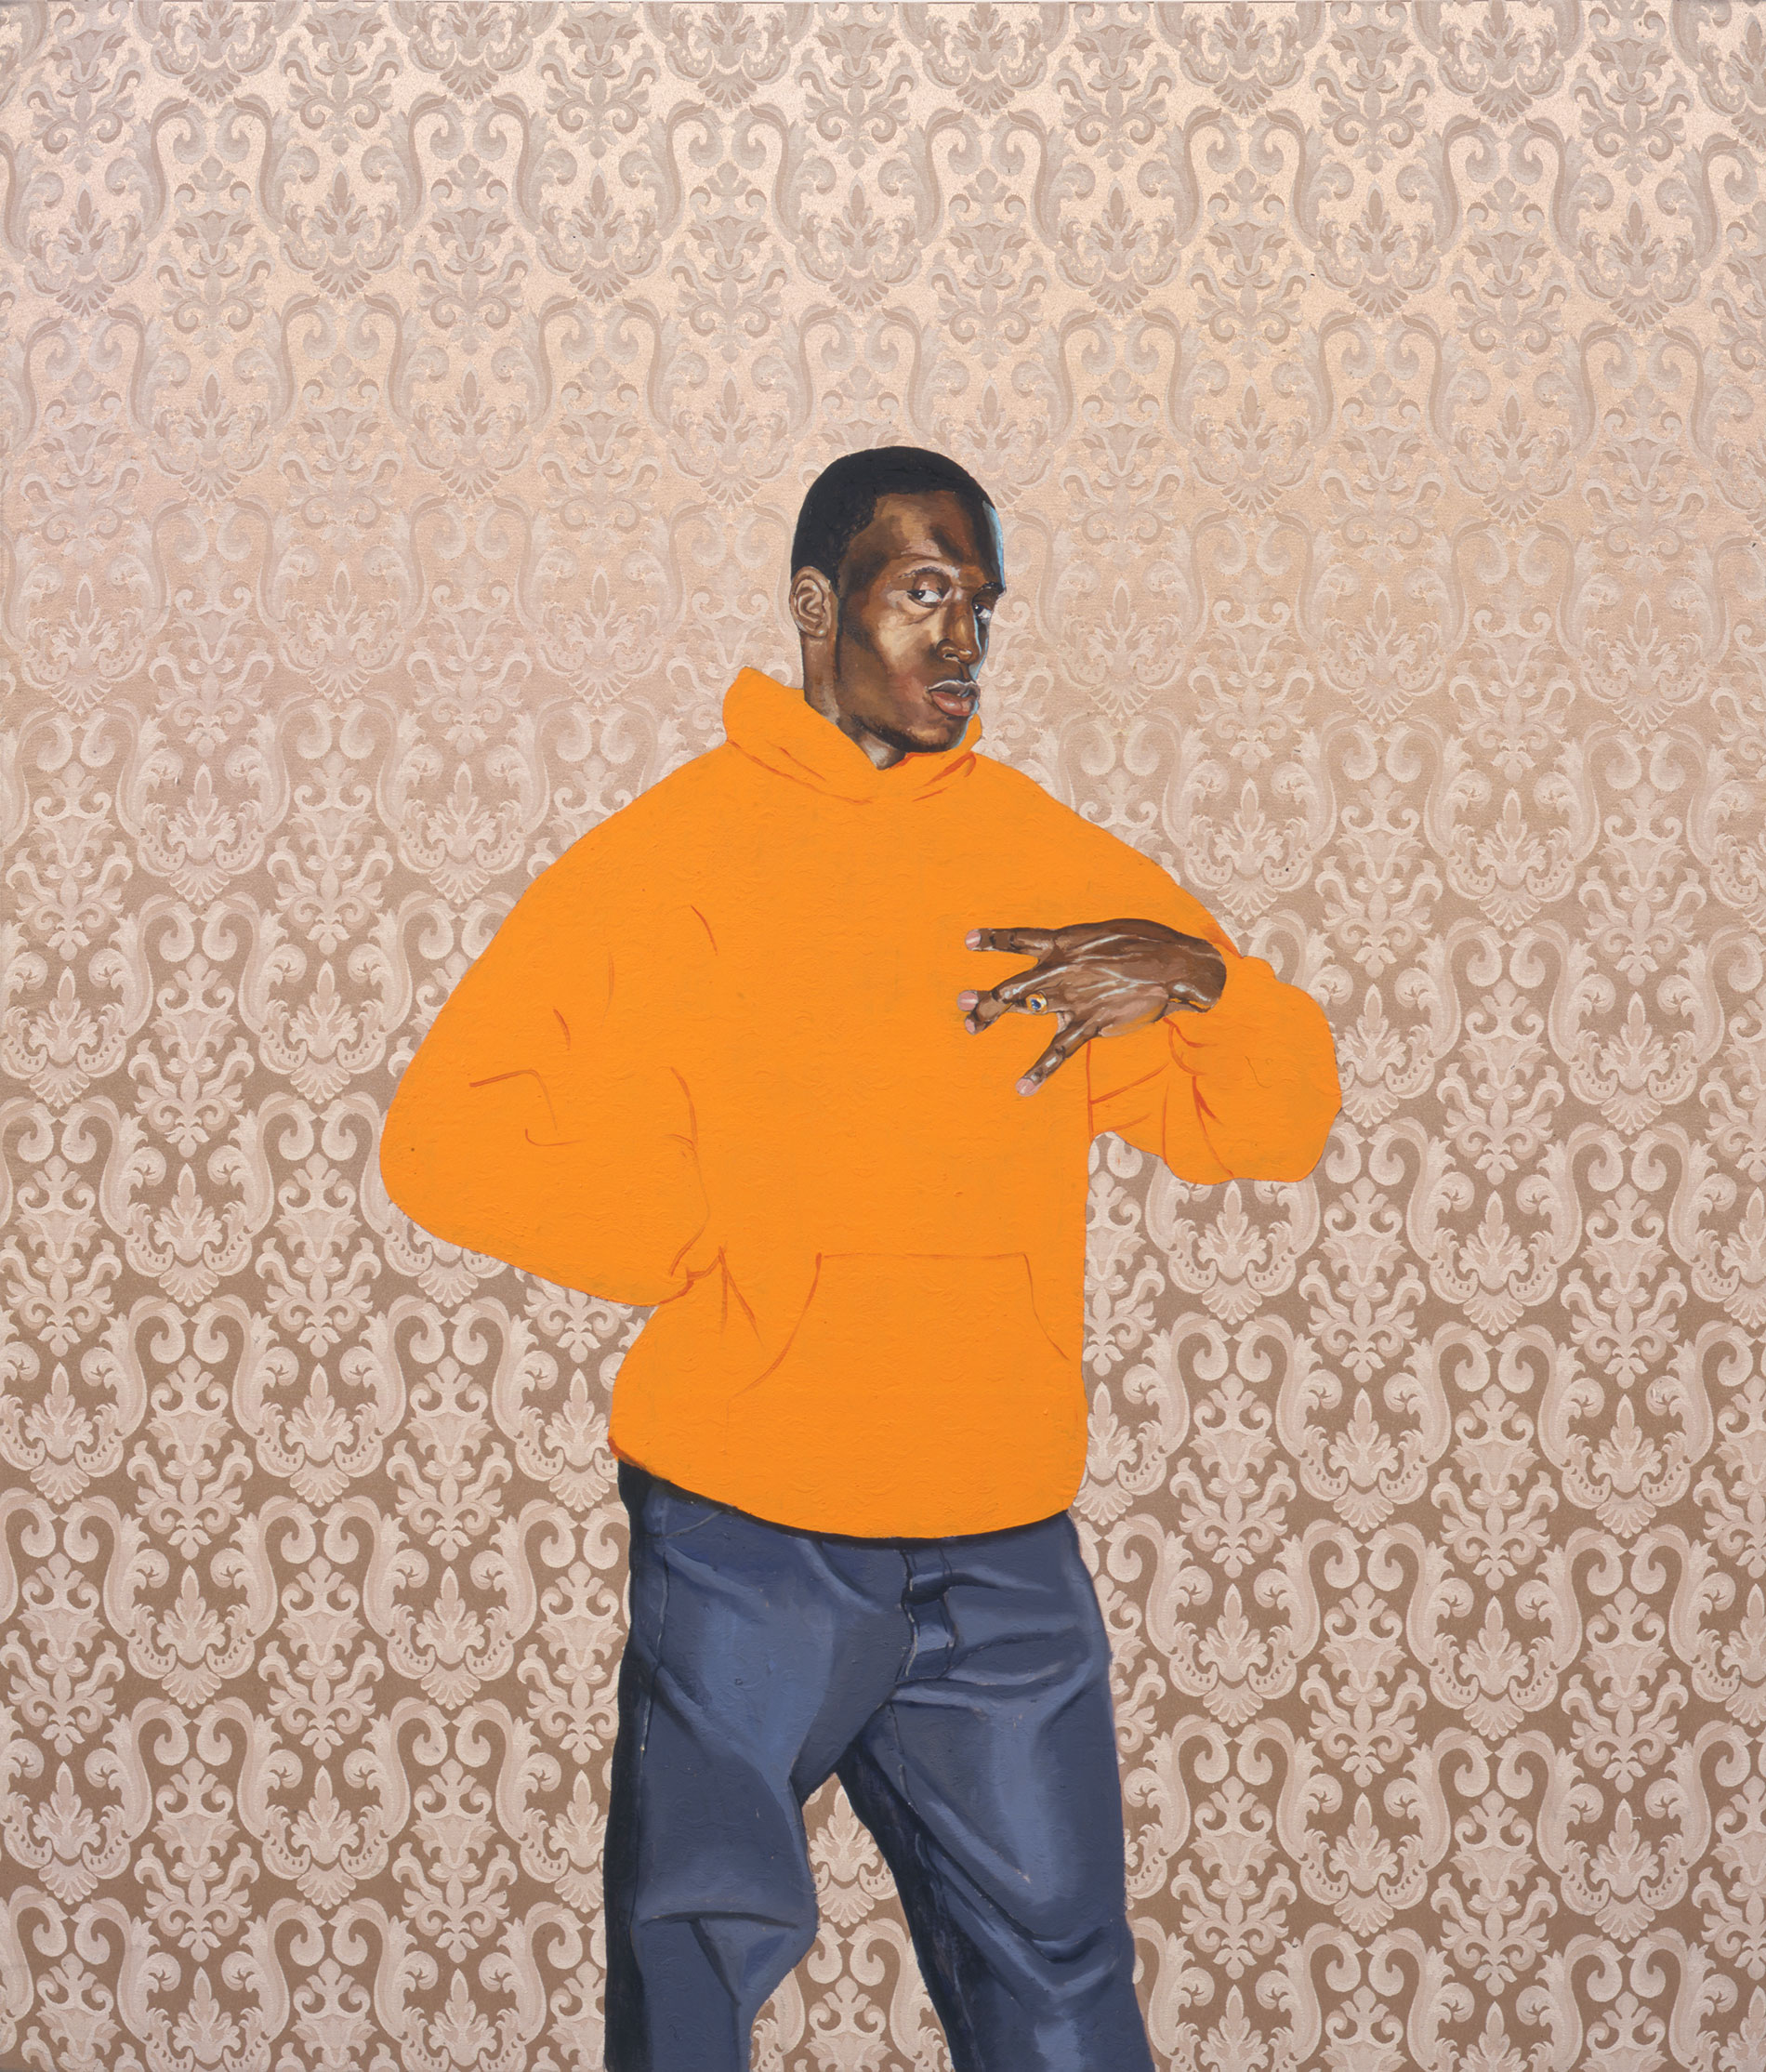 Kehinde Wiley | Passing / Posing  | Passing / Posing #15, 2002 Oil on Fabric. | 2